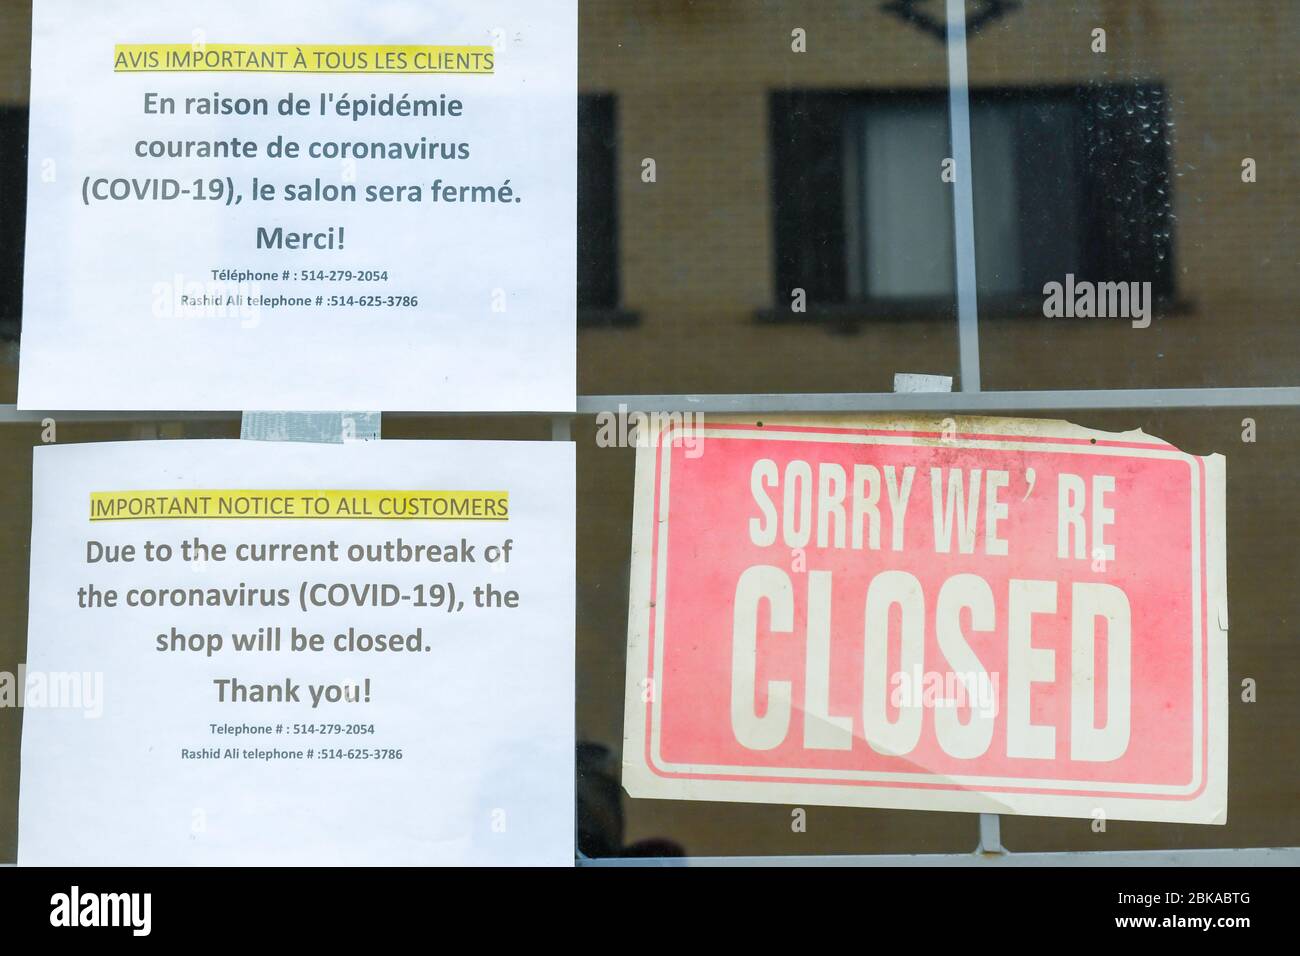 Closed business, Covid 19 Pandemic, Montreal Stock Photo